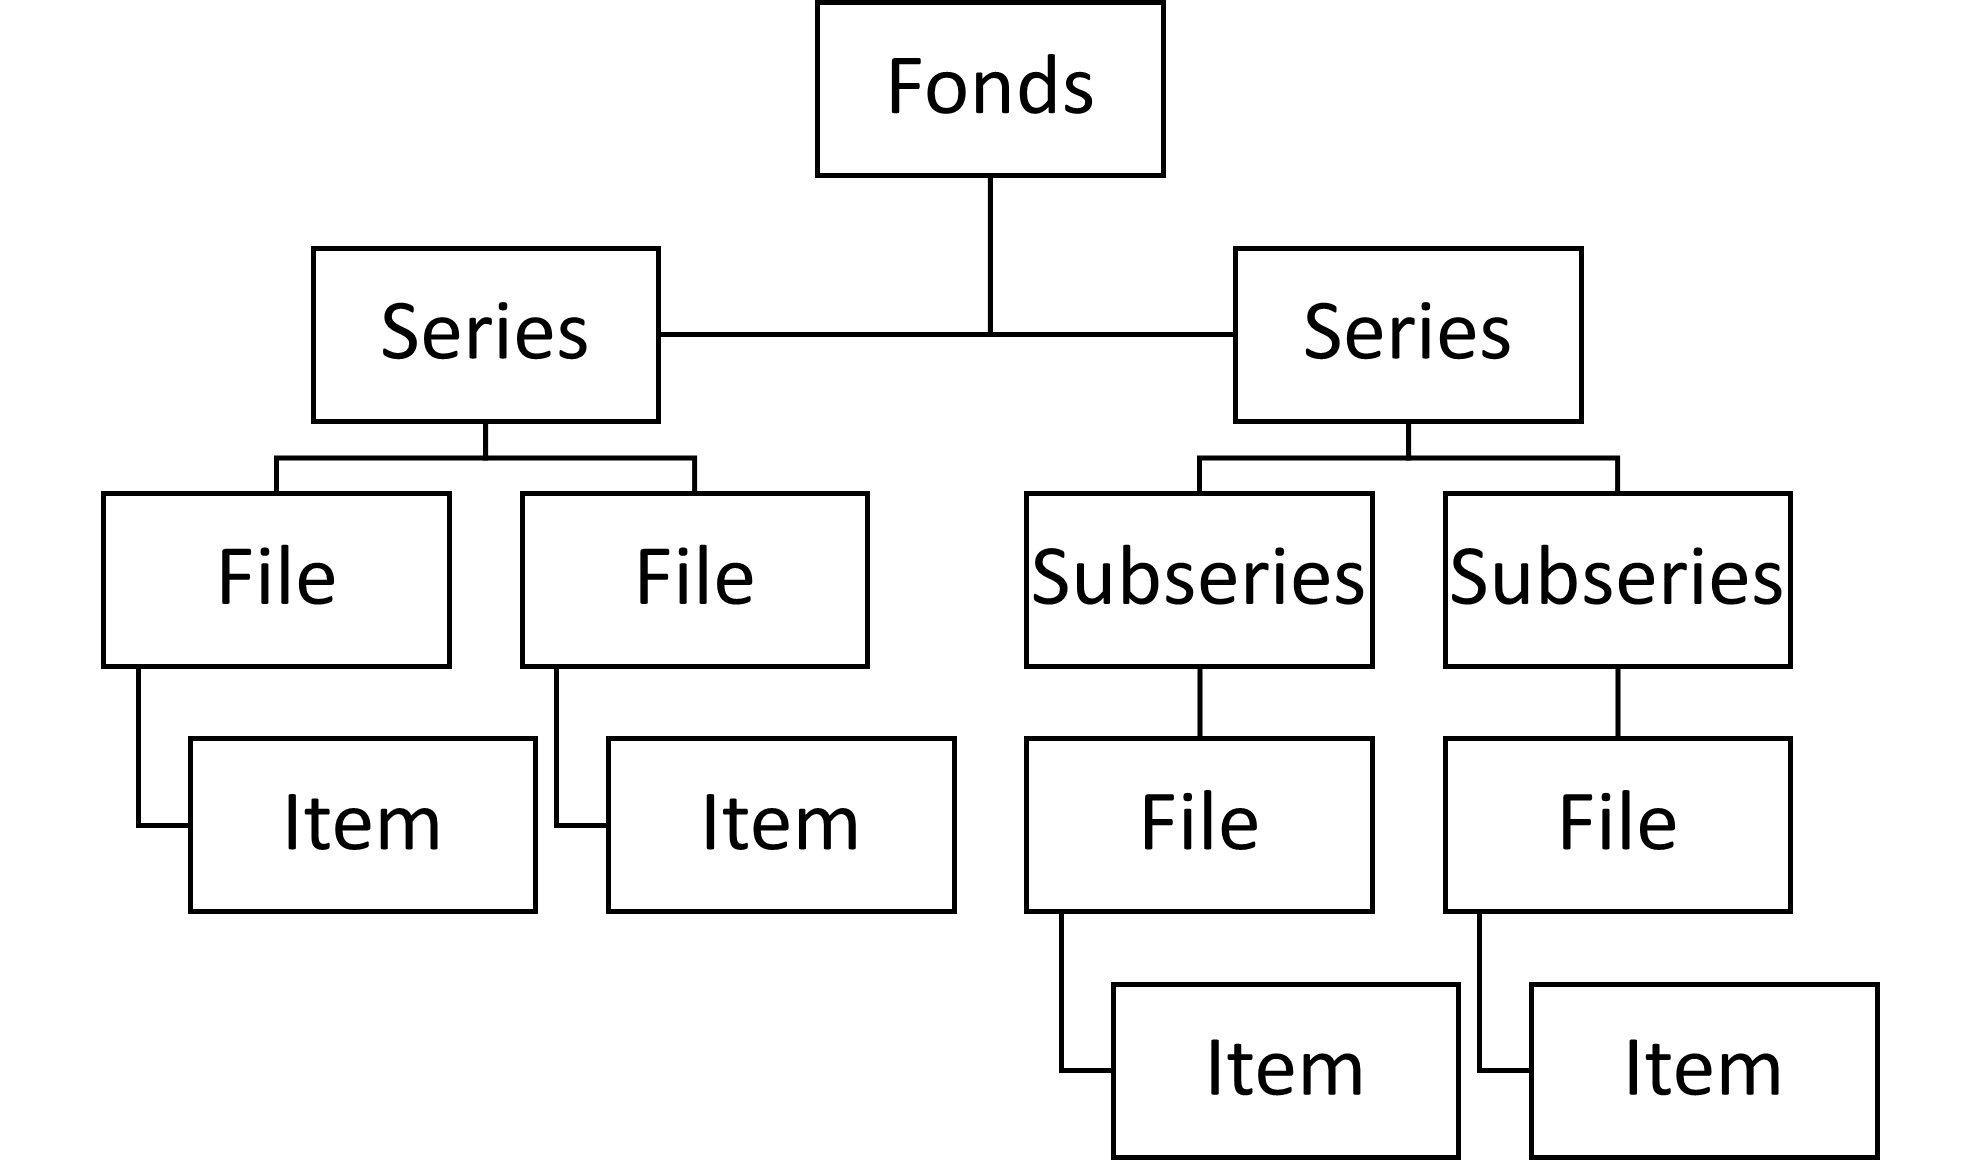 Tree chart demonstrating the hierarchical structure of a fonds. Top level: fonds. Second level down, branch one: series. Third level down, branch one: file. Fourth level down, branch one: item. Second level down, branch two: series. Third level down, branch two: subseries. Fourth level down, branch two: file. Fifth level down, branch two: item.